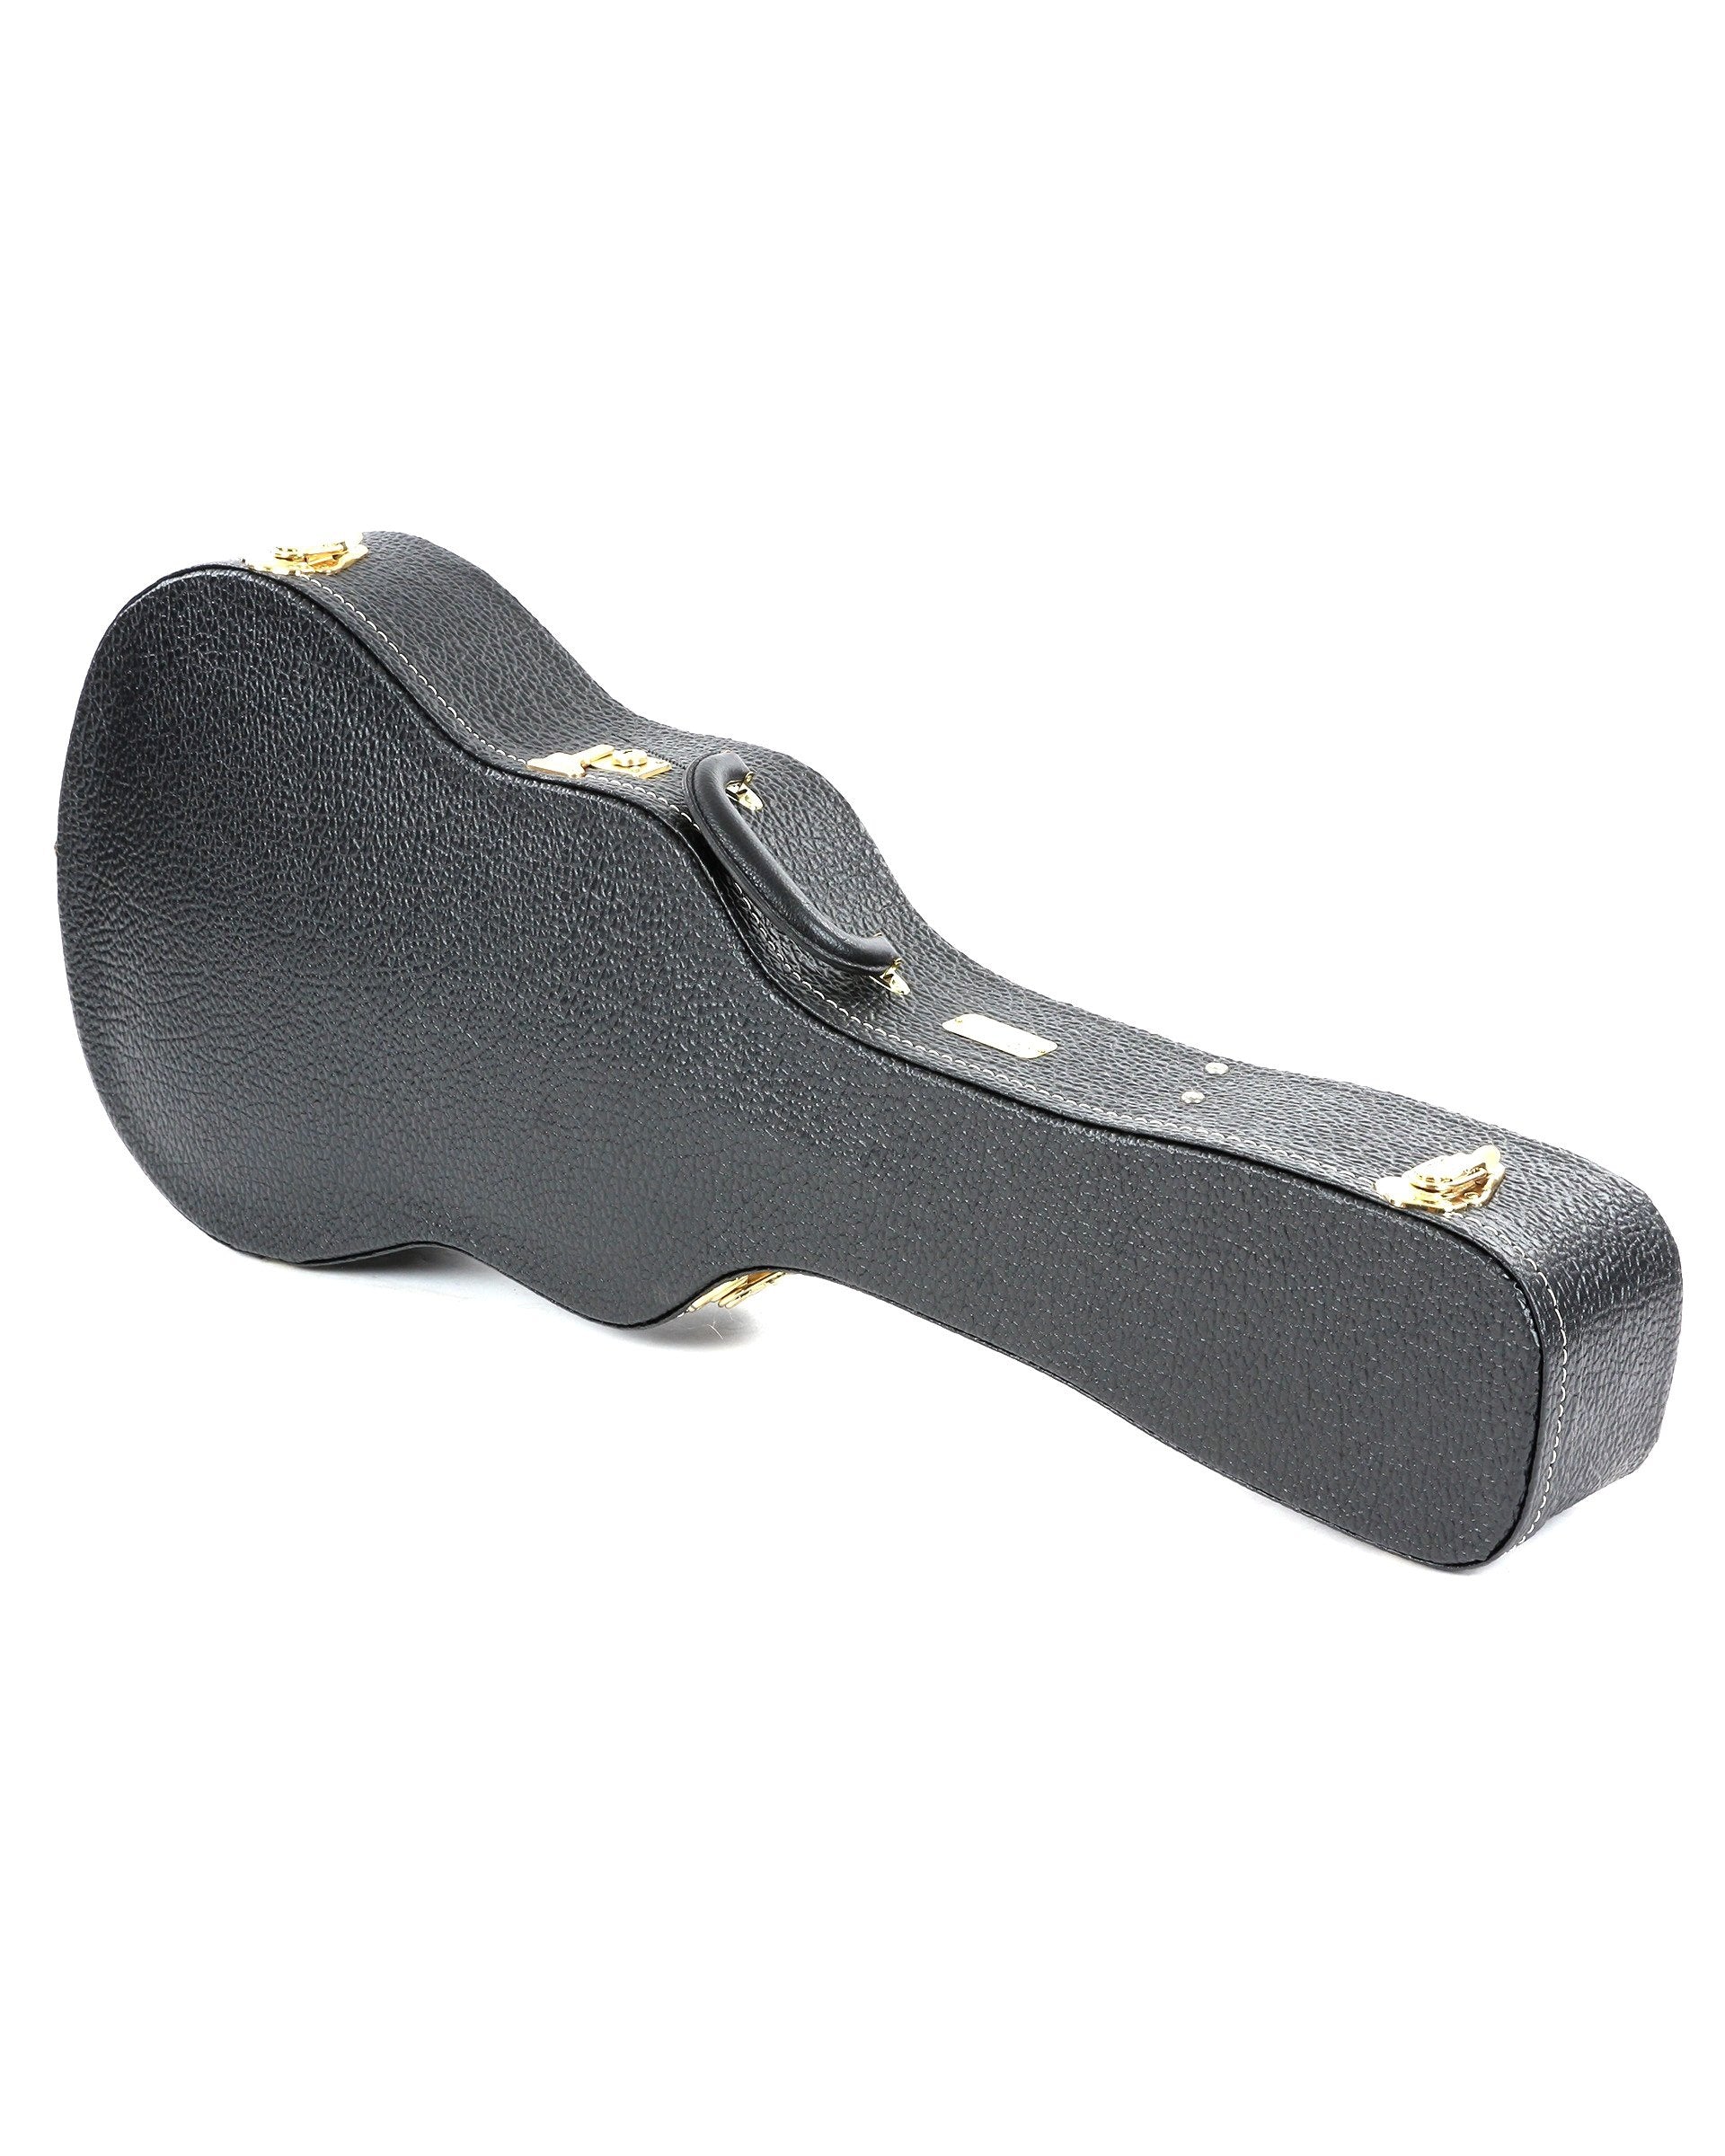 Image 1 of Harptone Historic "12-Fret 00" Guitar Case (Model HPT-209) - SKU# GCHH-0012 : Product Type Accessories & Parts : Elderly Instruments